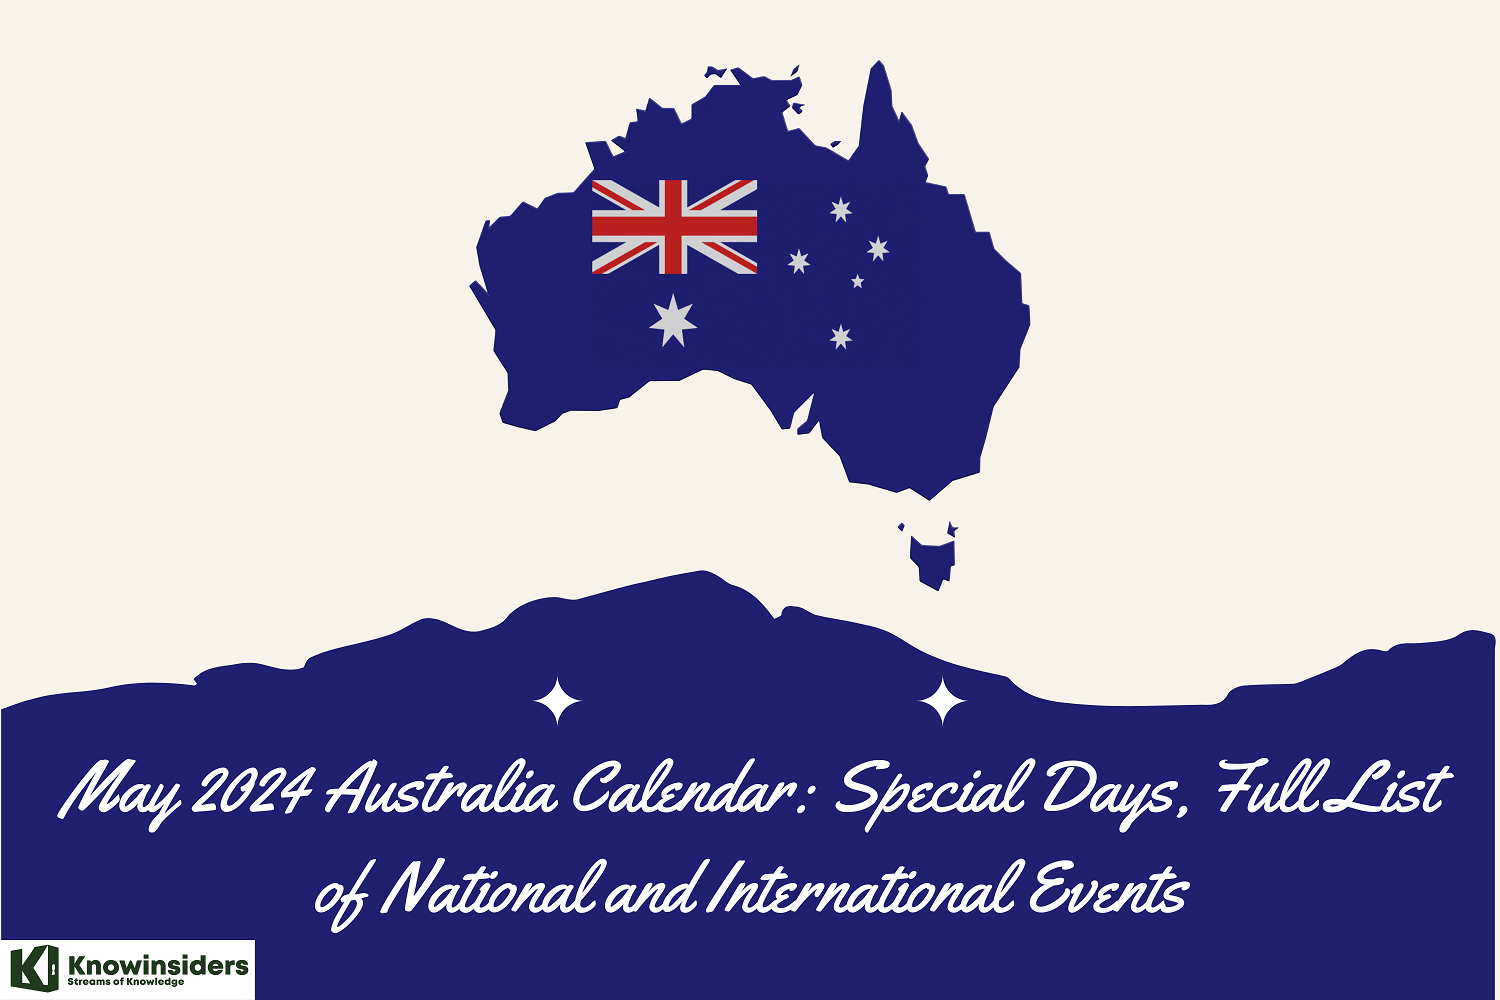 May 2024 Australia Calendar: Important Days, Full List of National Holidays and International Events